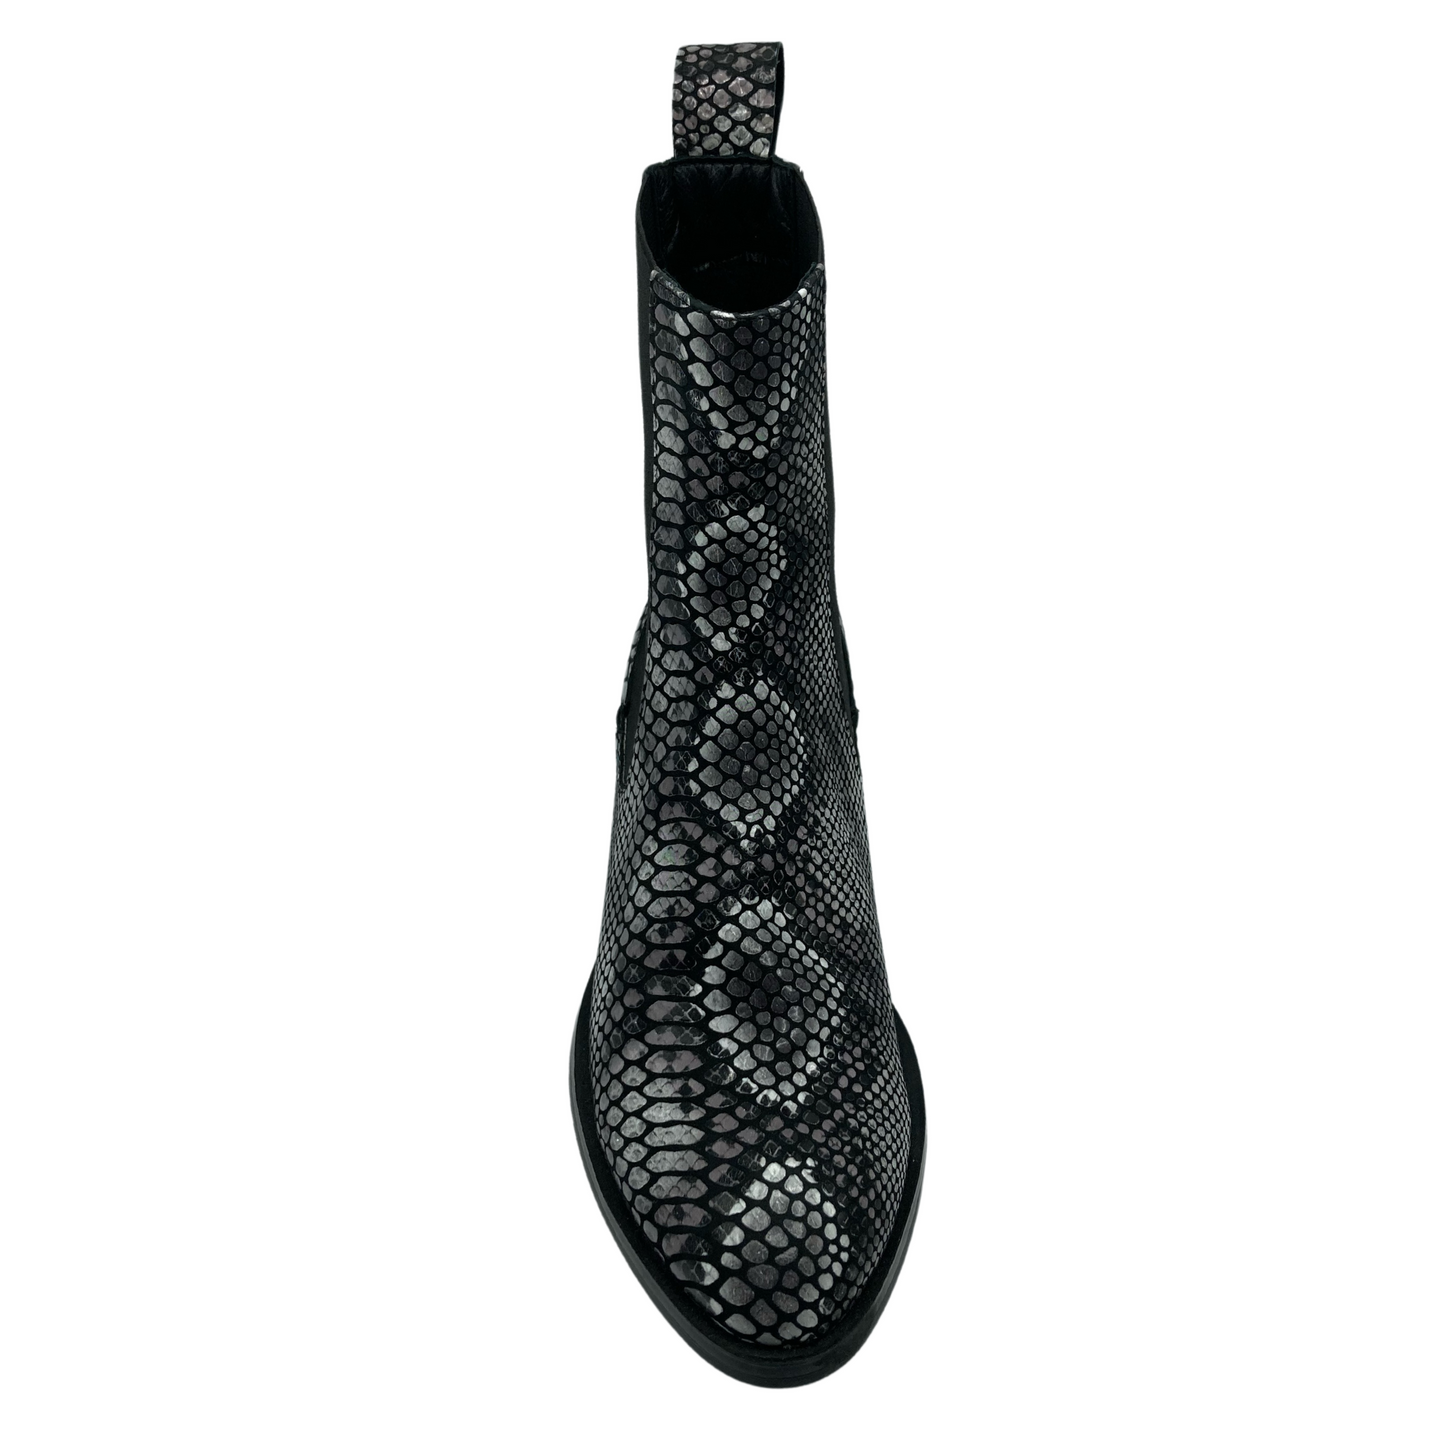 Top view of snake skin print leather boot with pull on heel tab